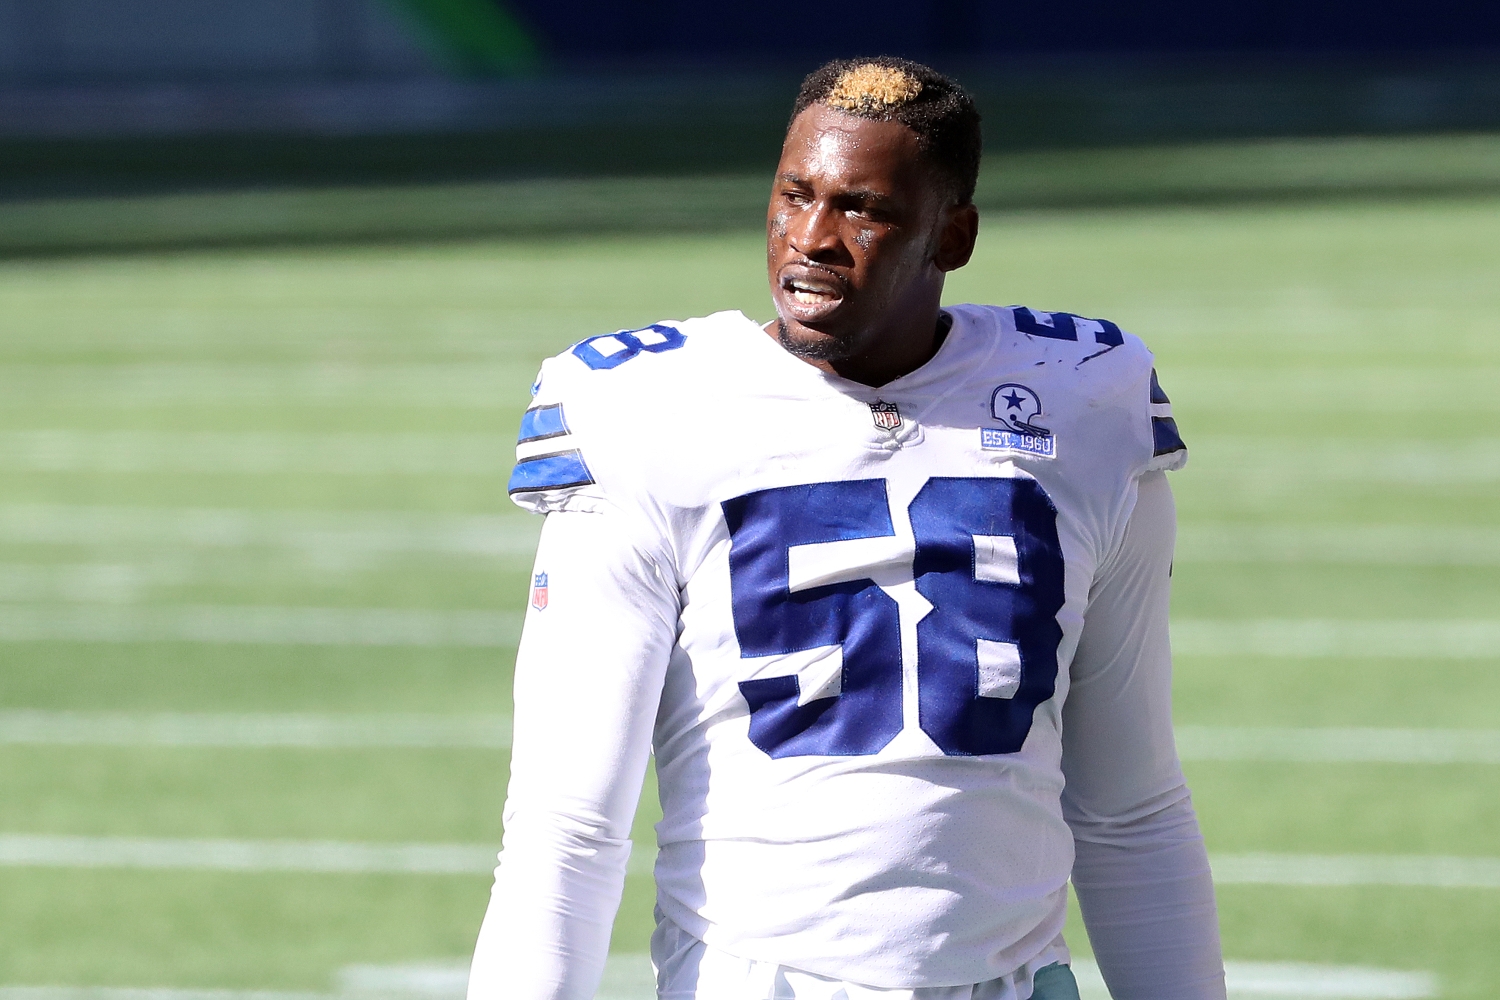 Aldon Smith stands with his helmet off during a Dallas Cowboys game.